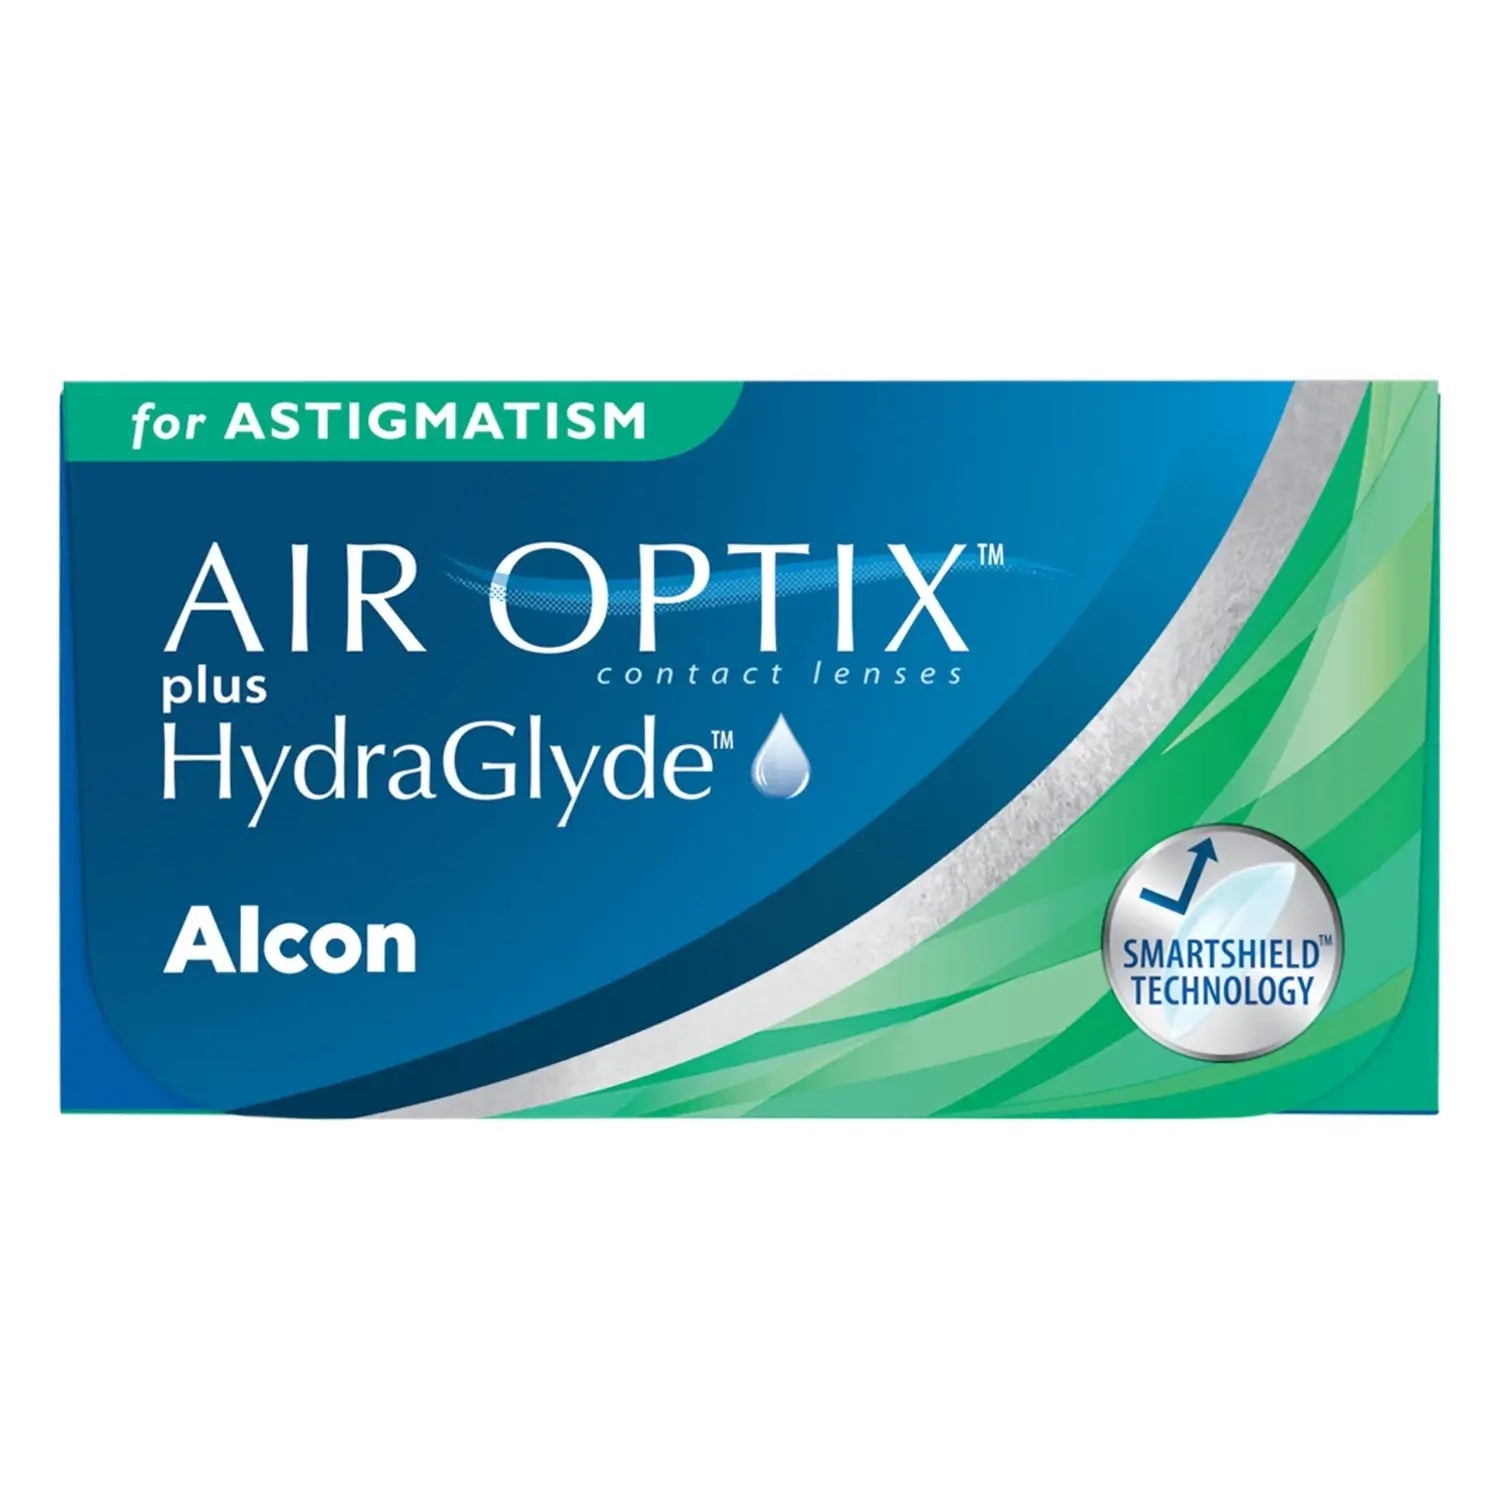 Certified Air Optix Astigmatism Toric Contact Lenses by Alcon on sale online at The Optical Co at the best prices